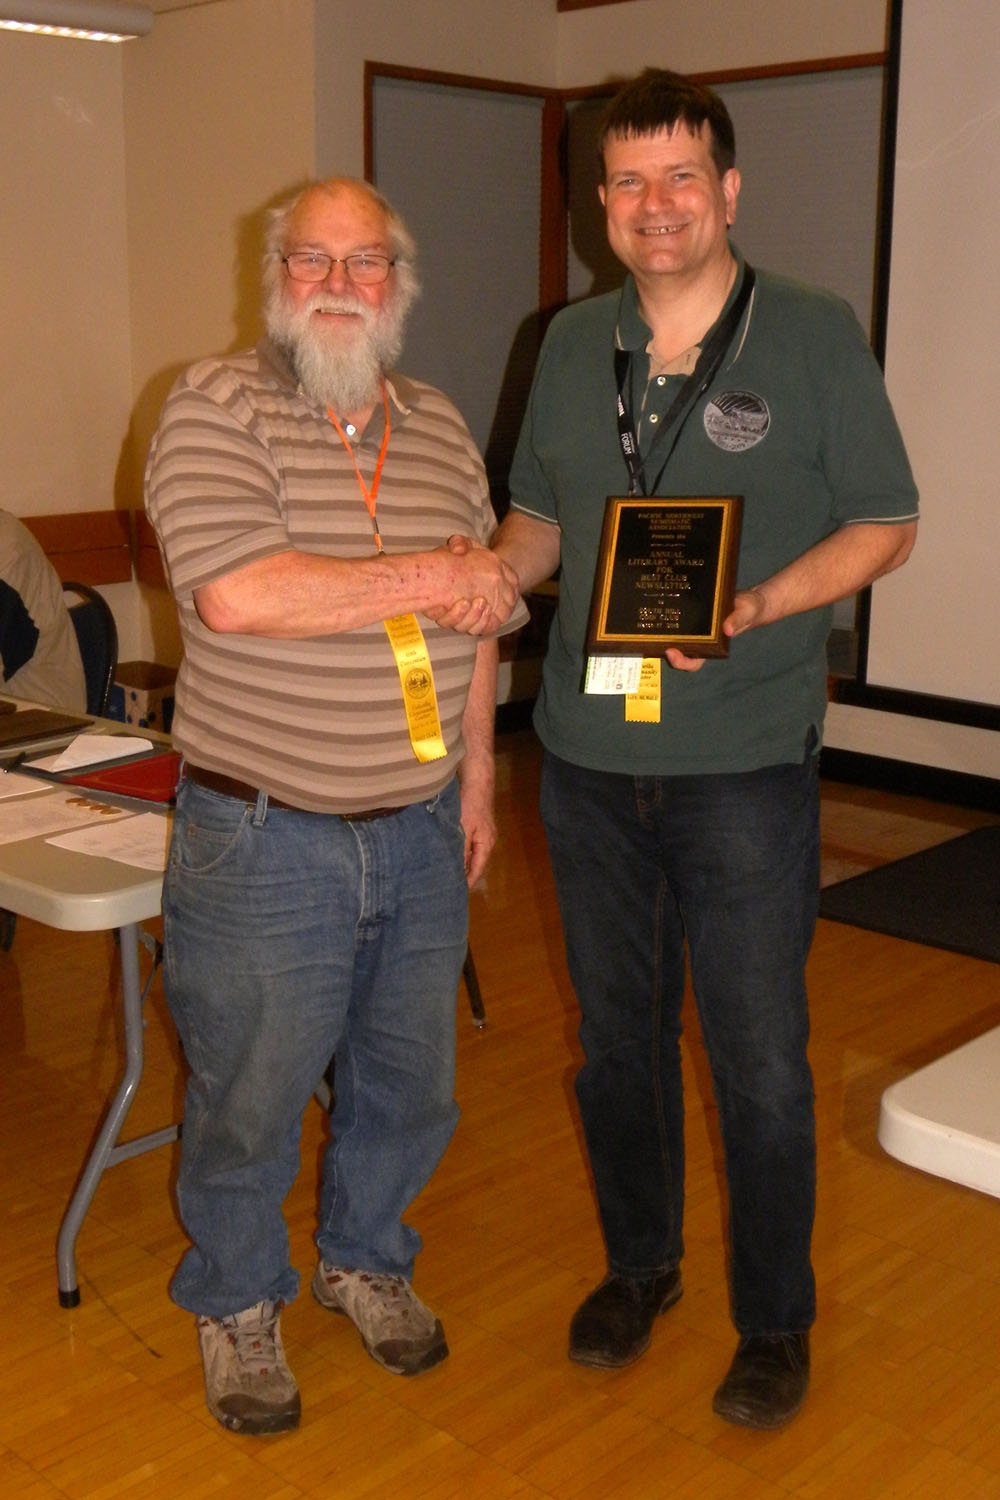 Rick Schulz/South Hill Coin Club - 2018 literary award for club newsletter